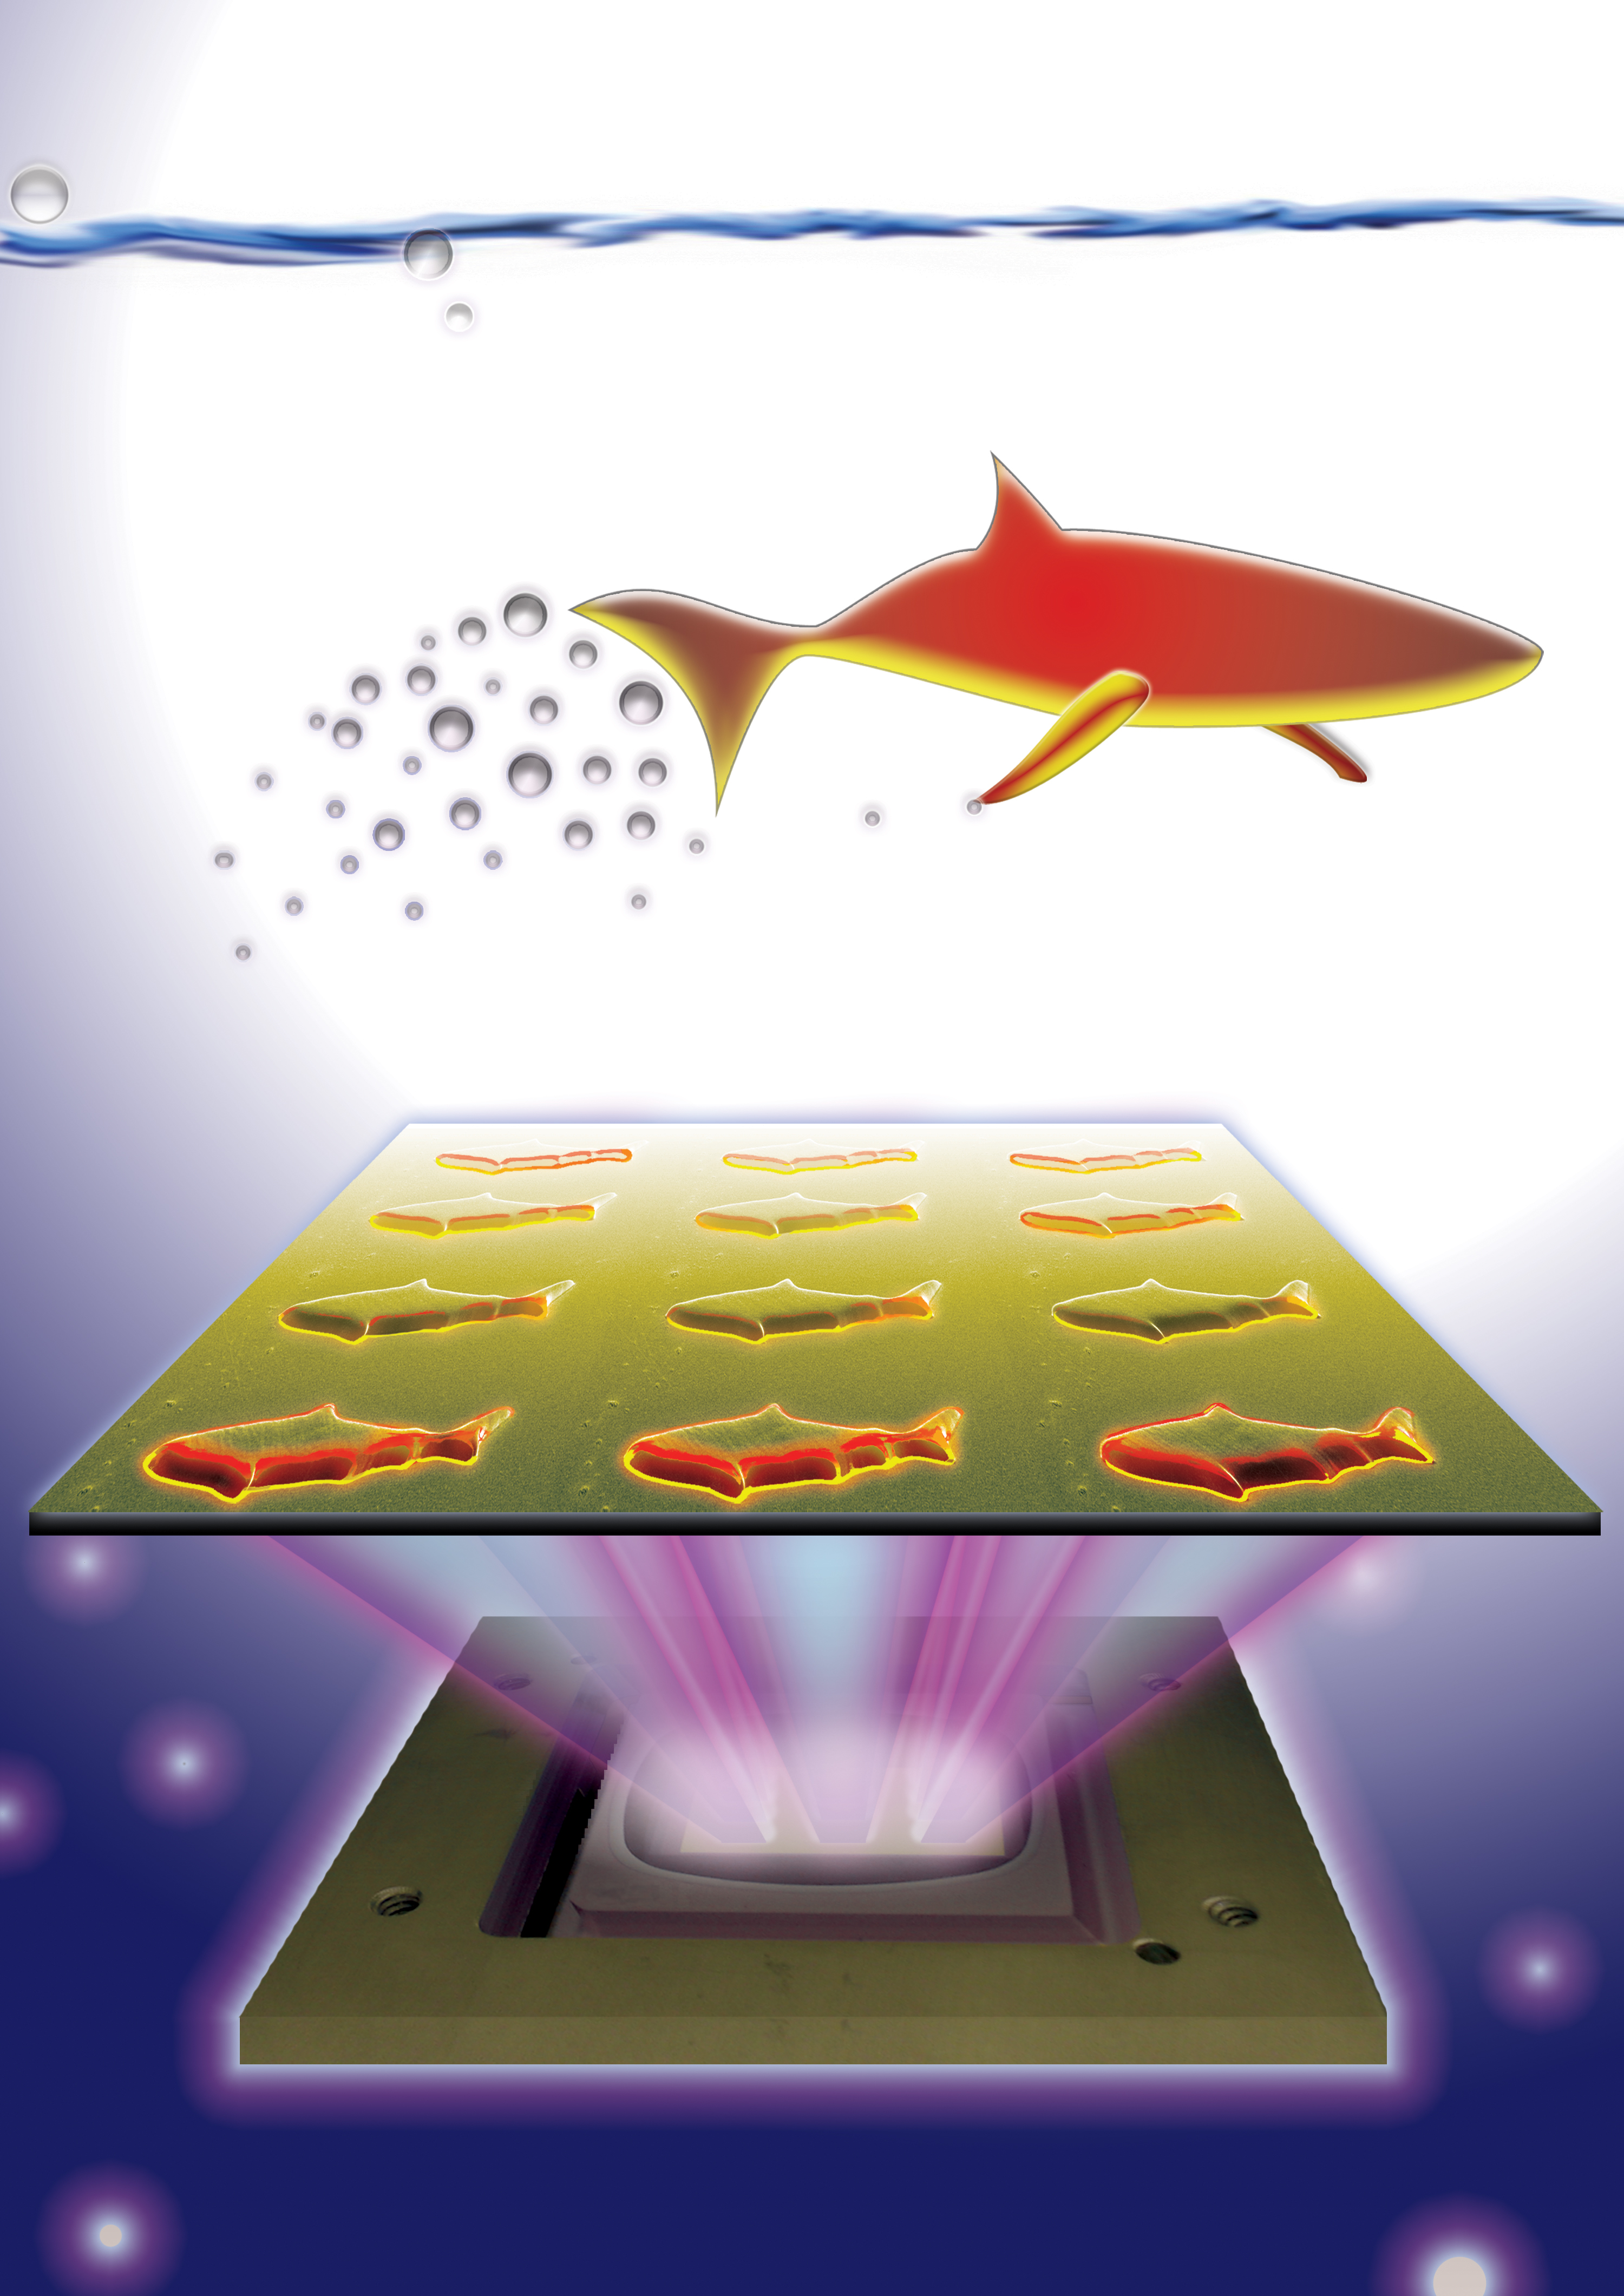 3D-printed microfish contain functional nanoparticles that enable them to be self-propelled, chemically powered and magnetically steered. The microfish are also capable of removing and sensing toxins.